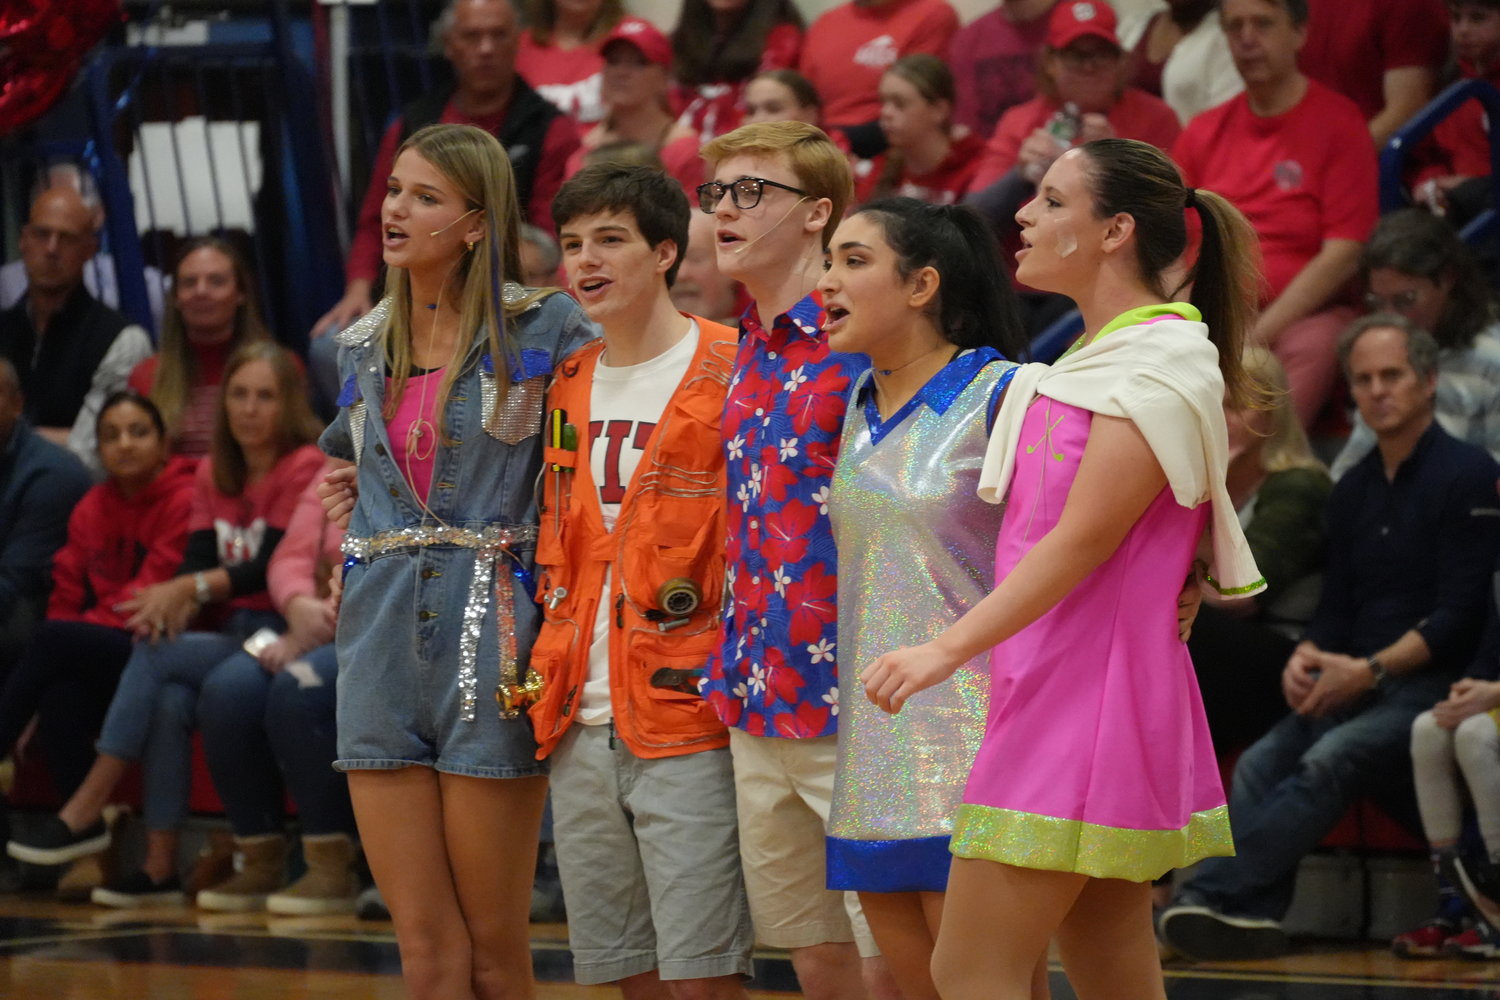 Maggie Chifriller, Chris Kenny, Drew Aromiskis, Alayna Marzolini, and Kelsie Backus hit rewind for their performance based on the 1985 comedy classic, ‘The Goonies.’